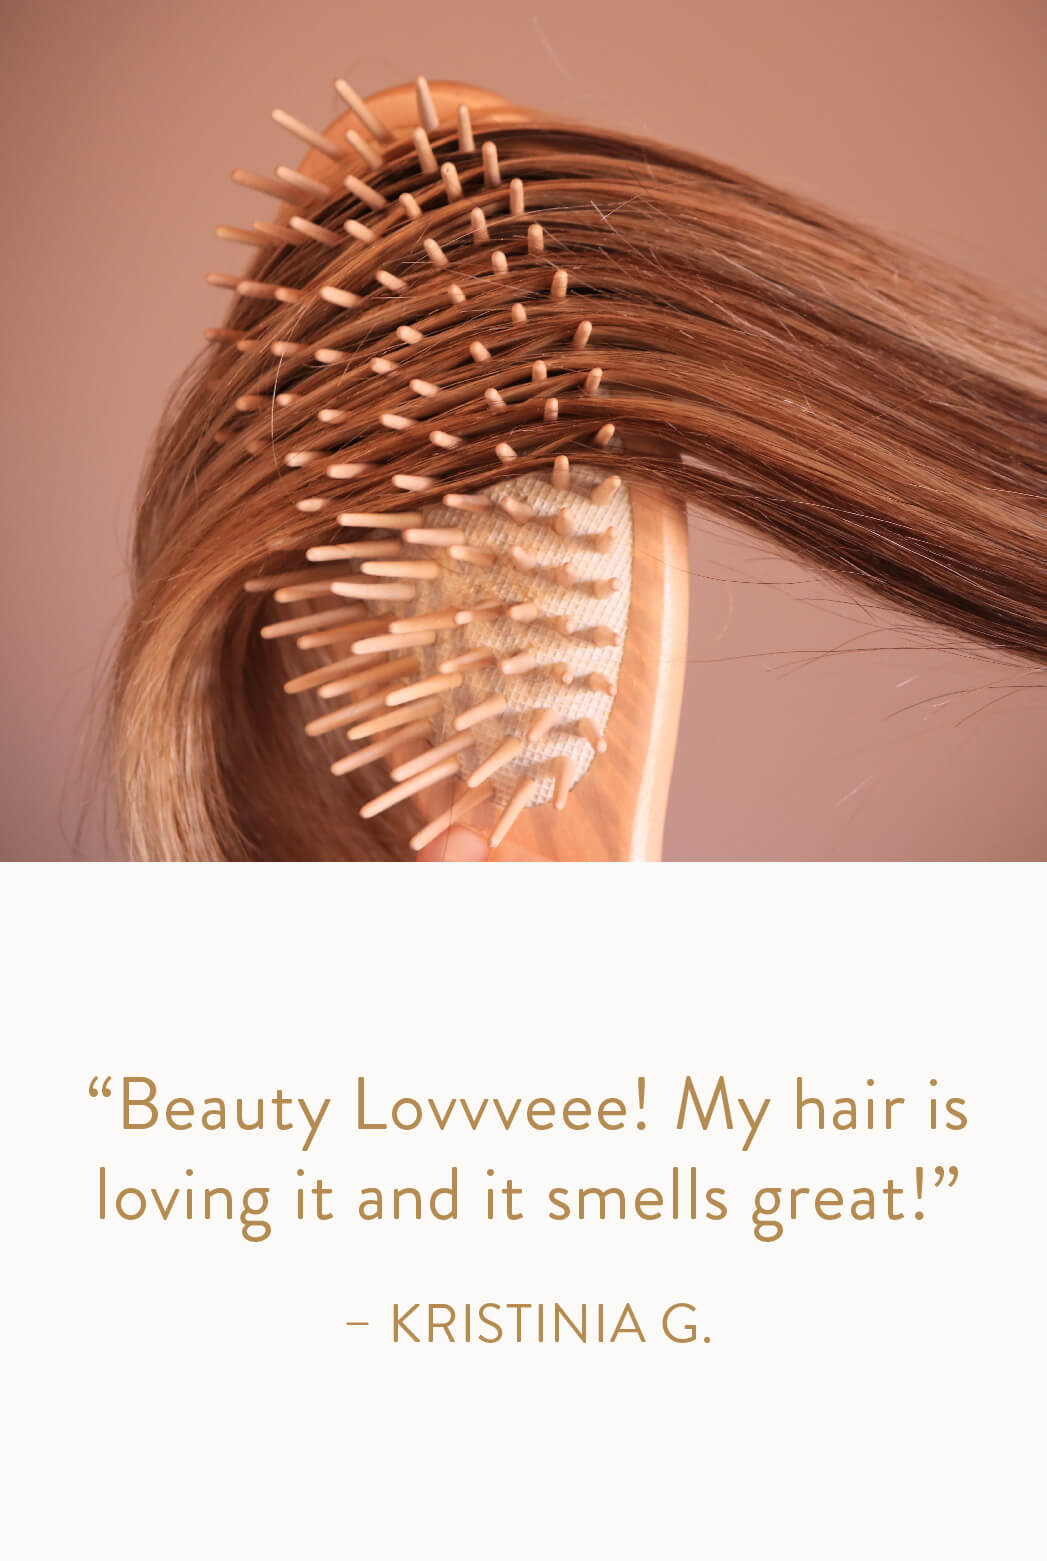 "Beauty Love! My hair is loving it and it smells great!" - Kristinia G.